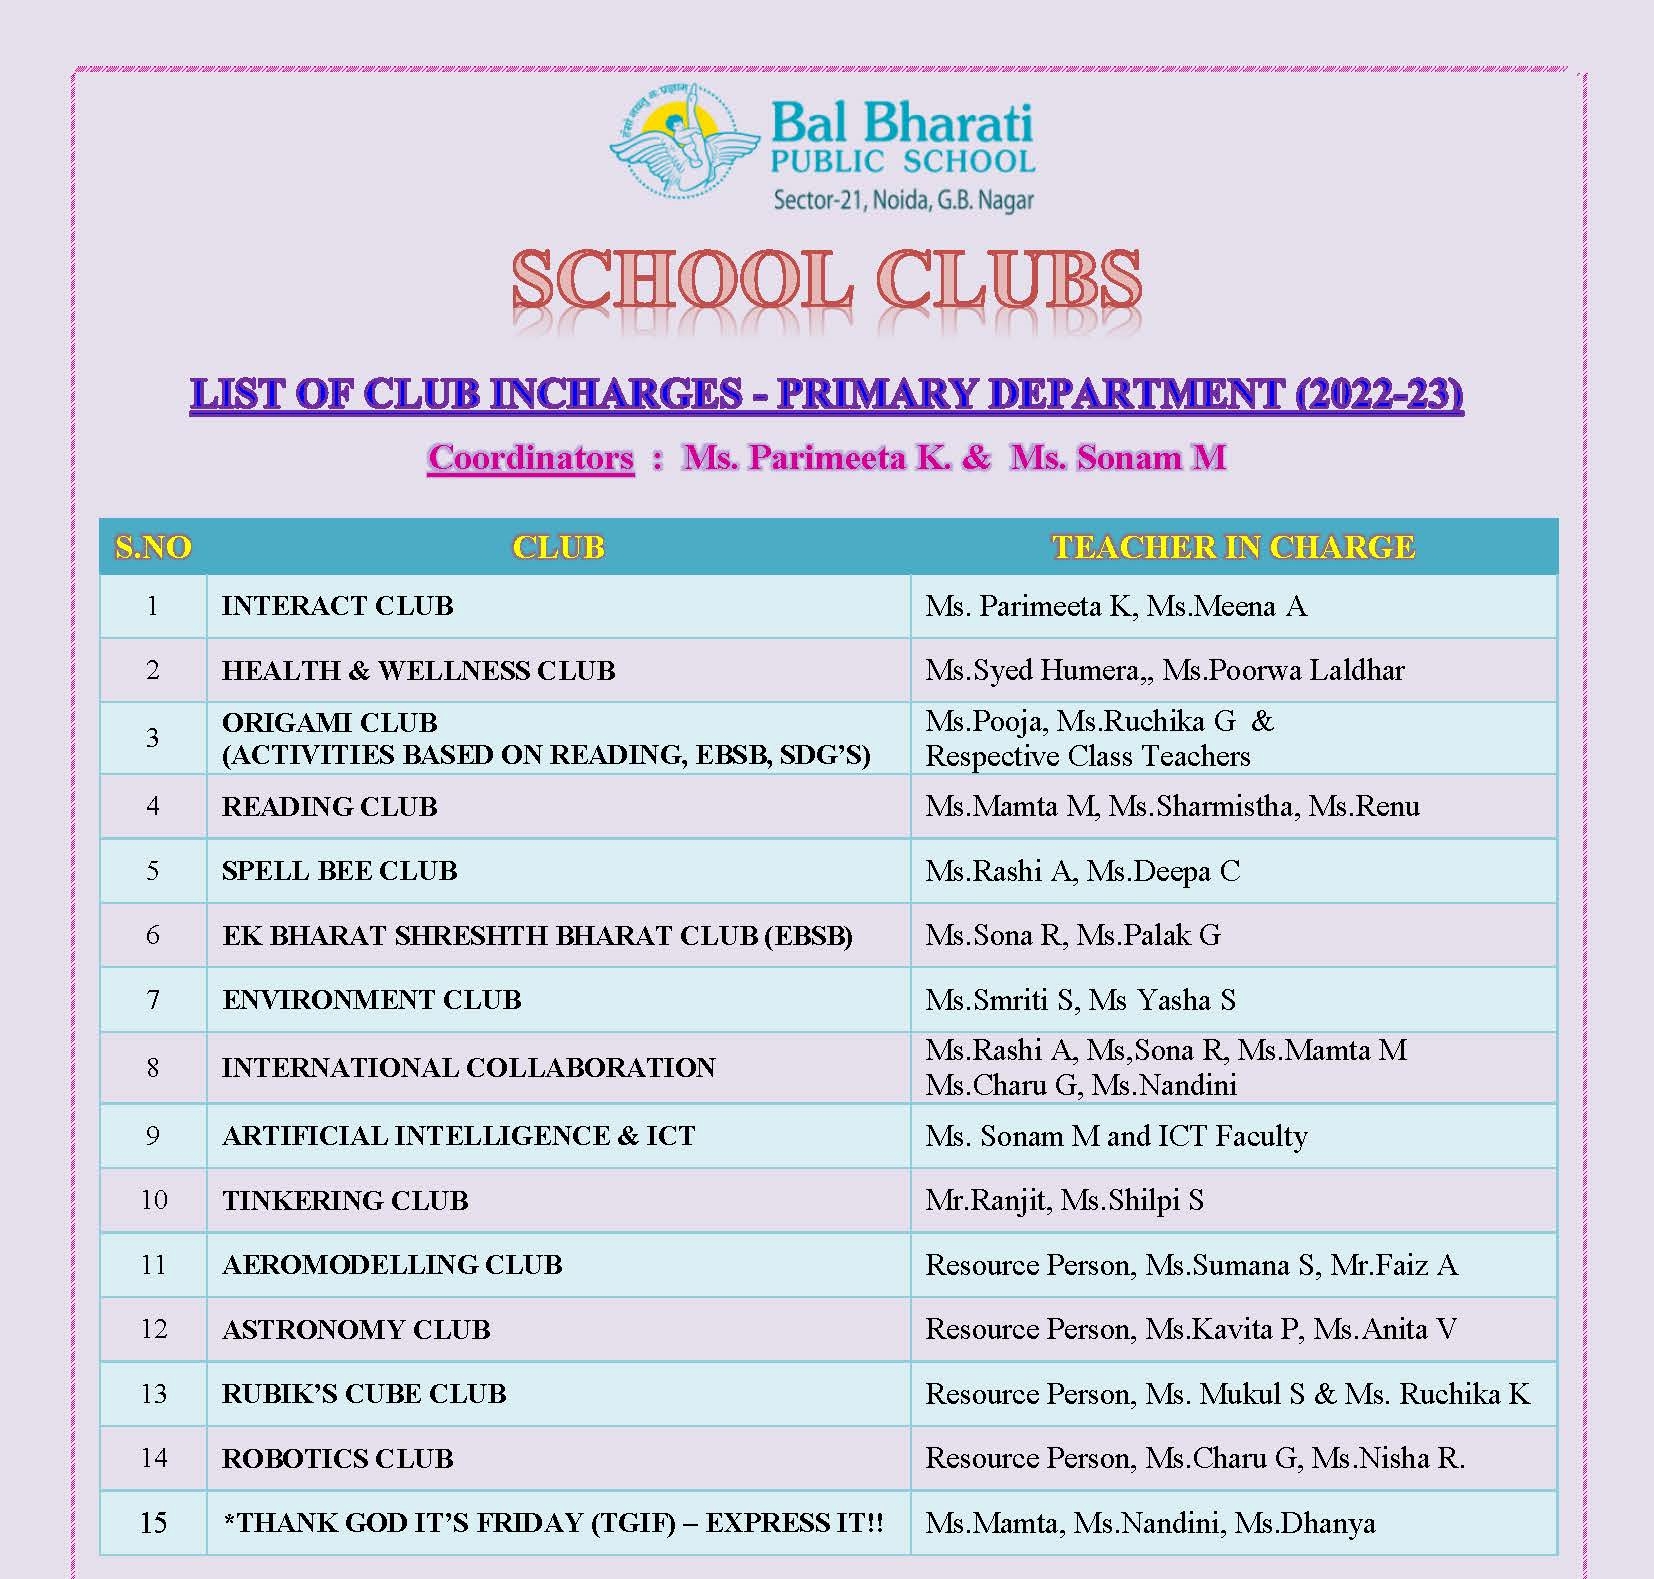 School Clubs - List of Club Incharges